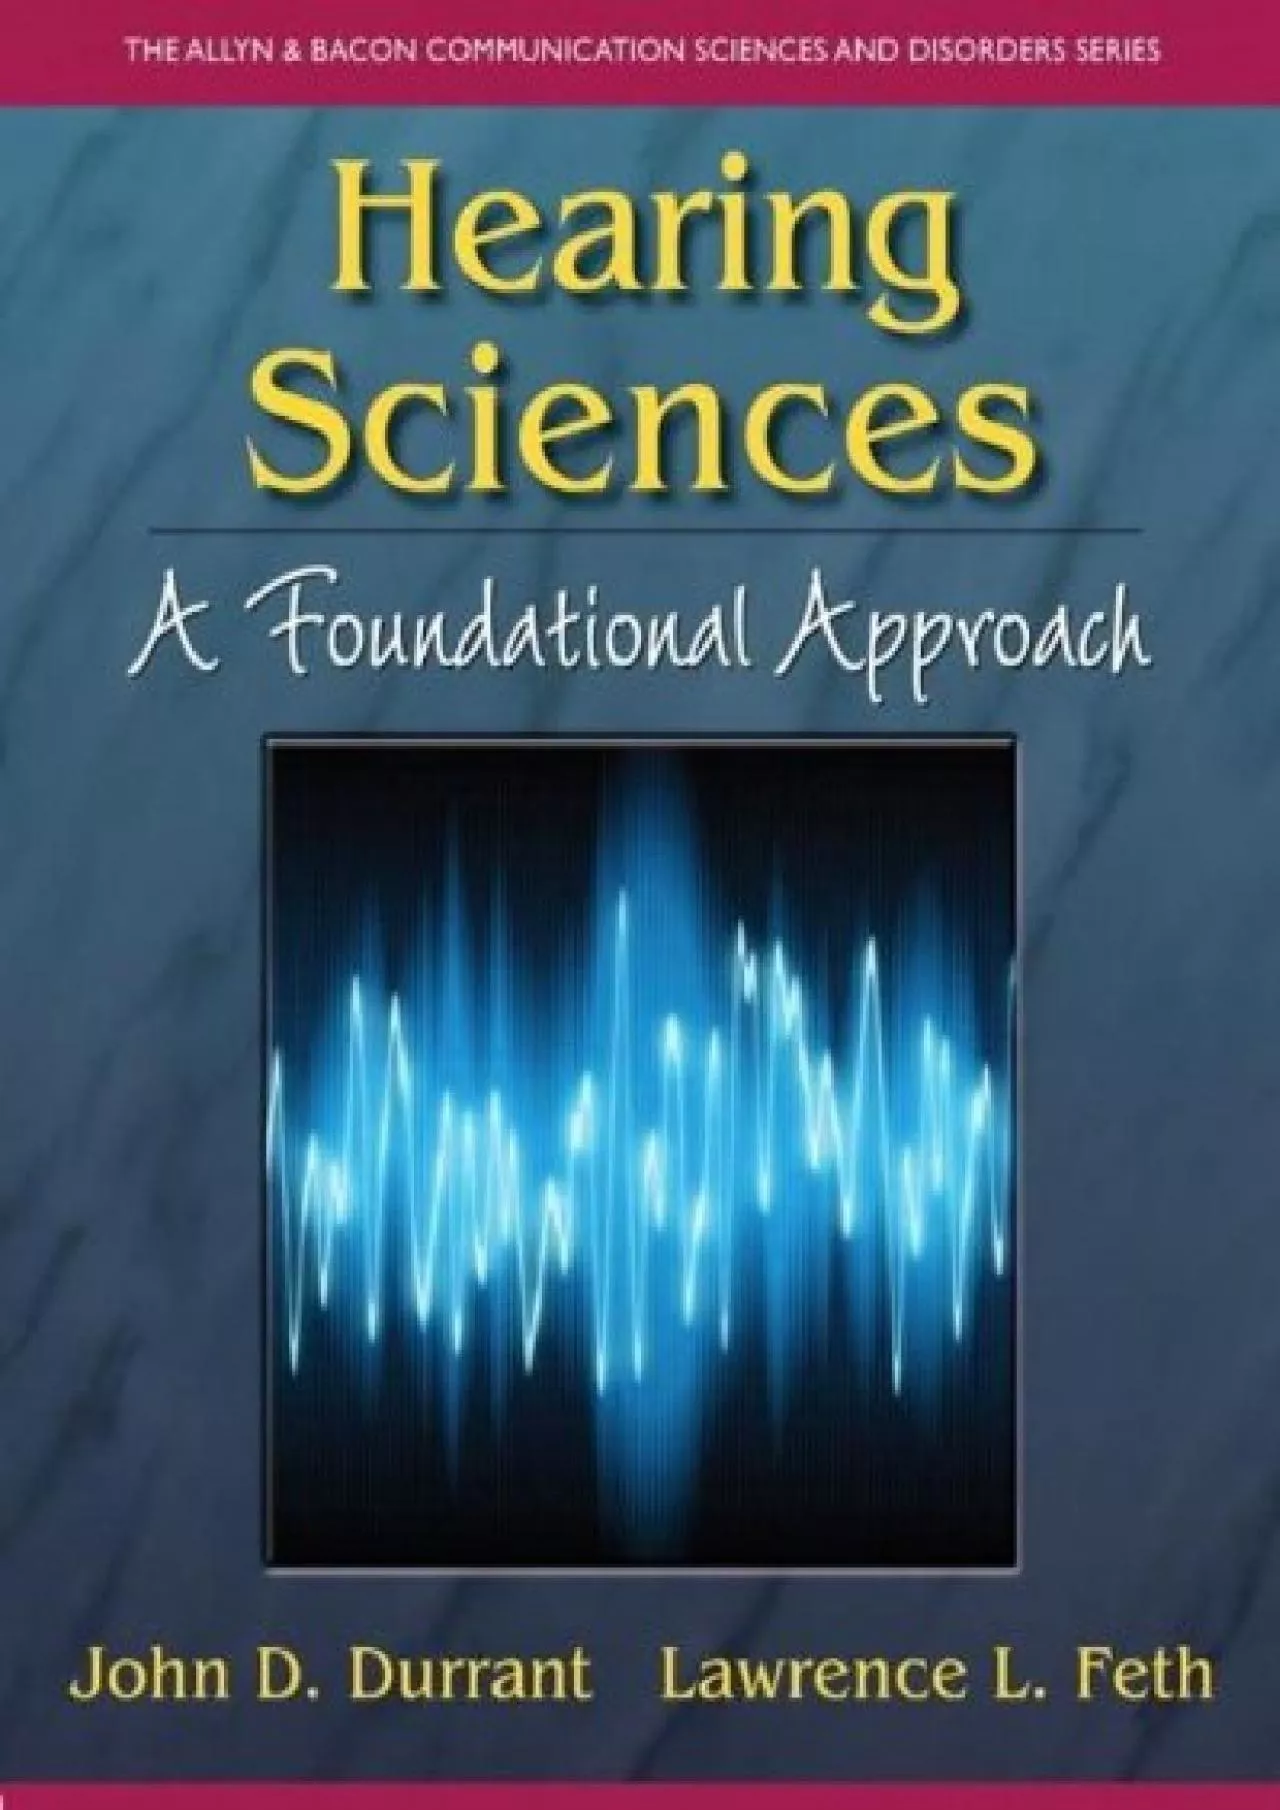 (EBOOK)-Hearing Sciences: A Foundational Approach (The Allyn & Bacon Communication Sciences